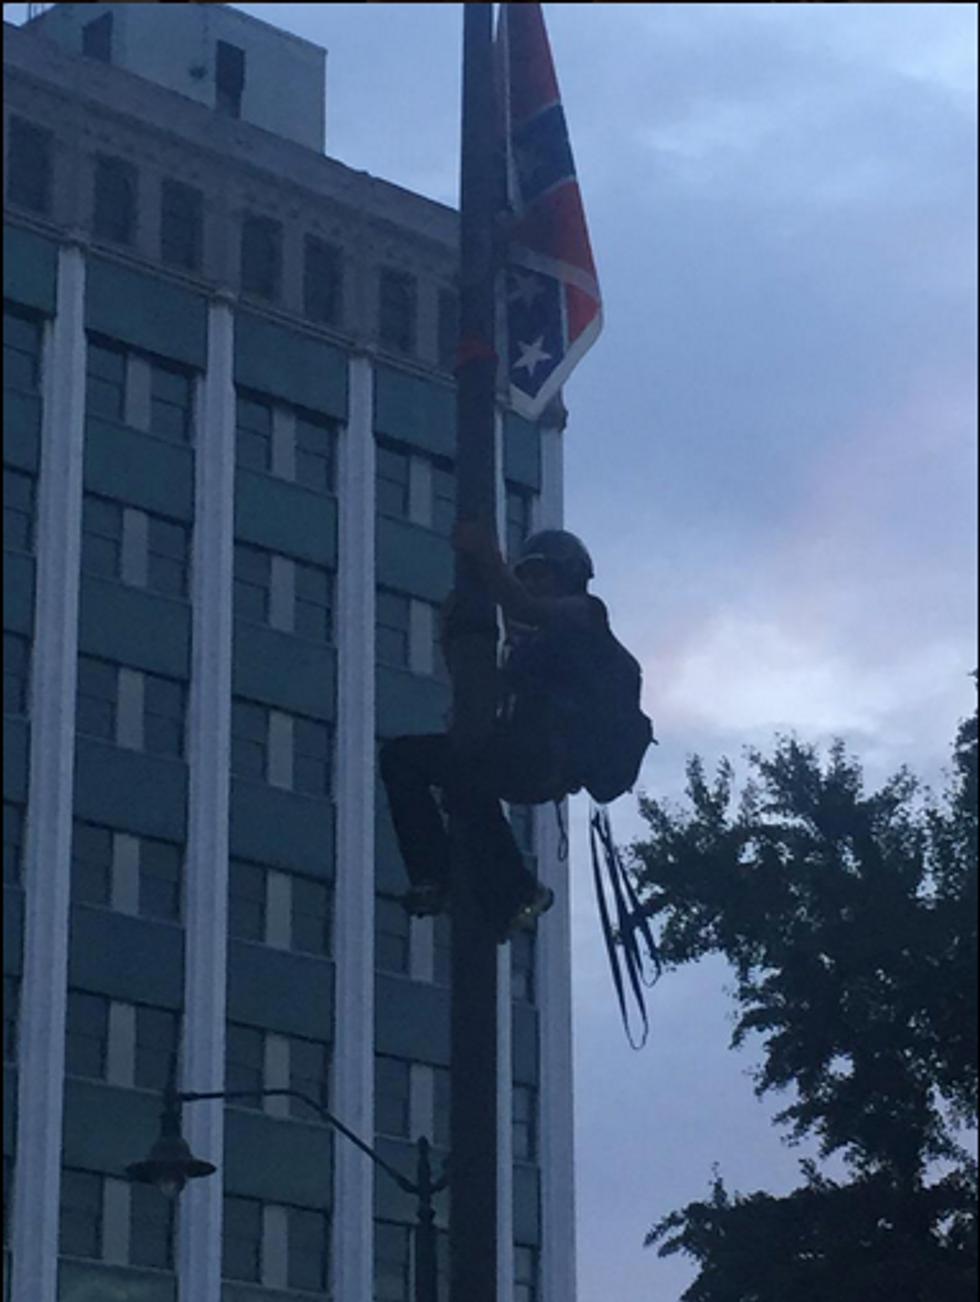 Activist Scales Flagpole to Remove Confederate Flag From South Carolina's Capitol